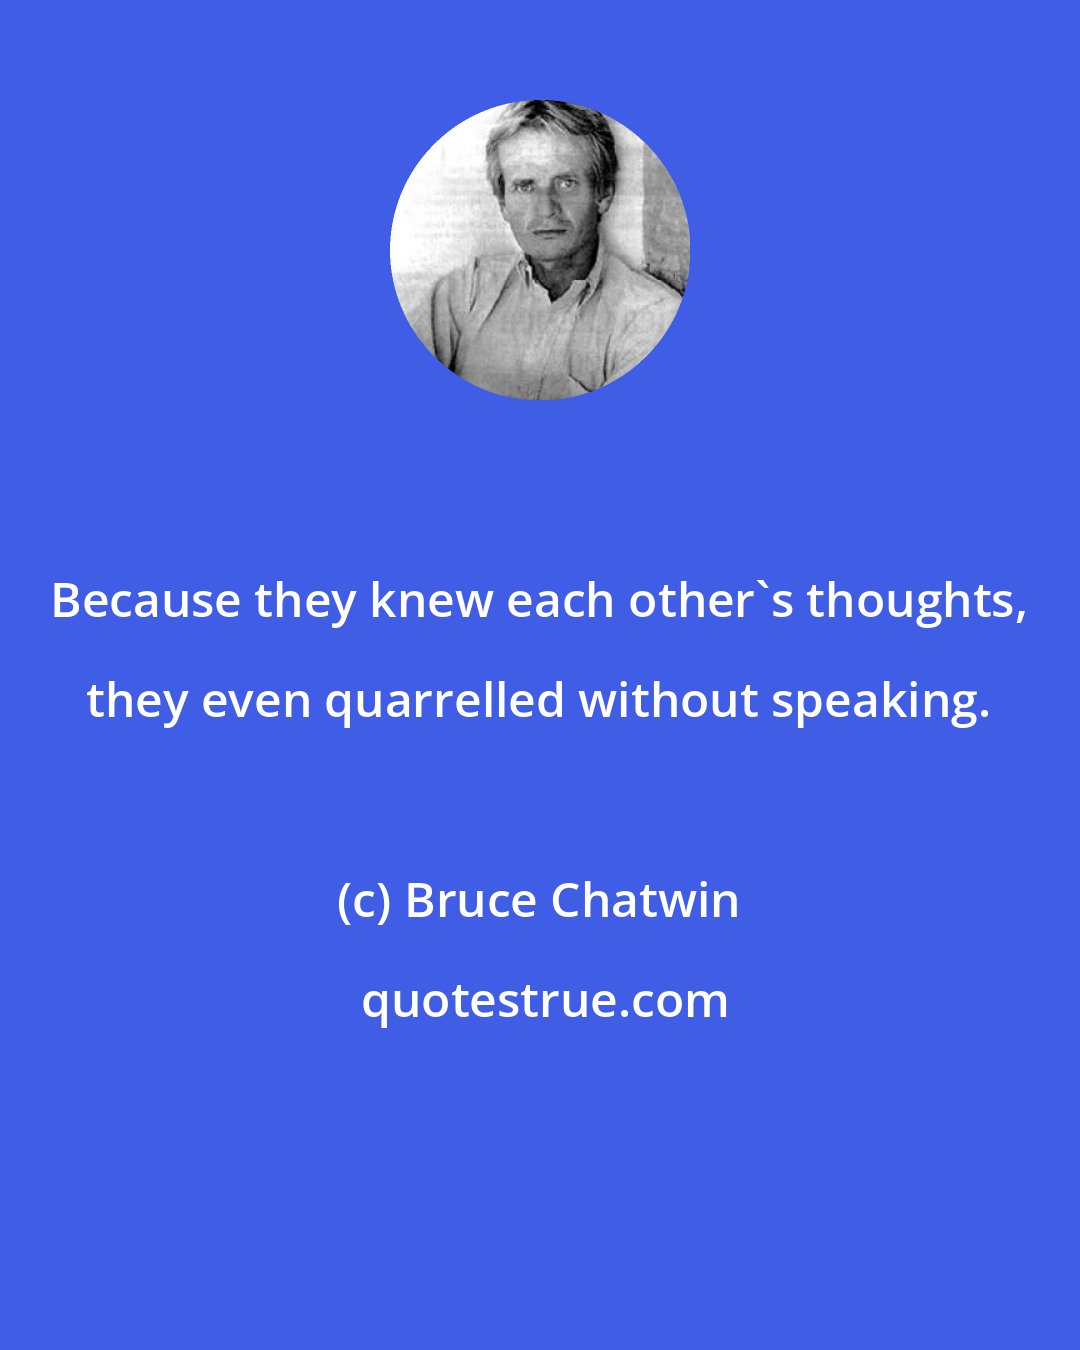 Bruce Chatwin: Because they knew each other's thoughts, they even quarrelled without speaking.